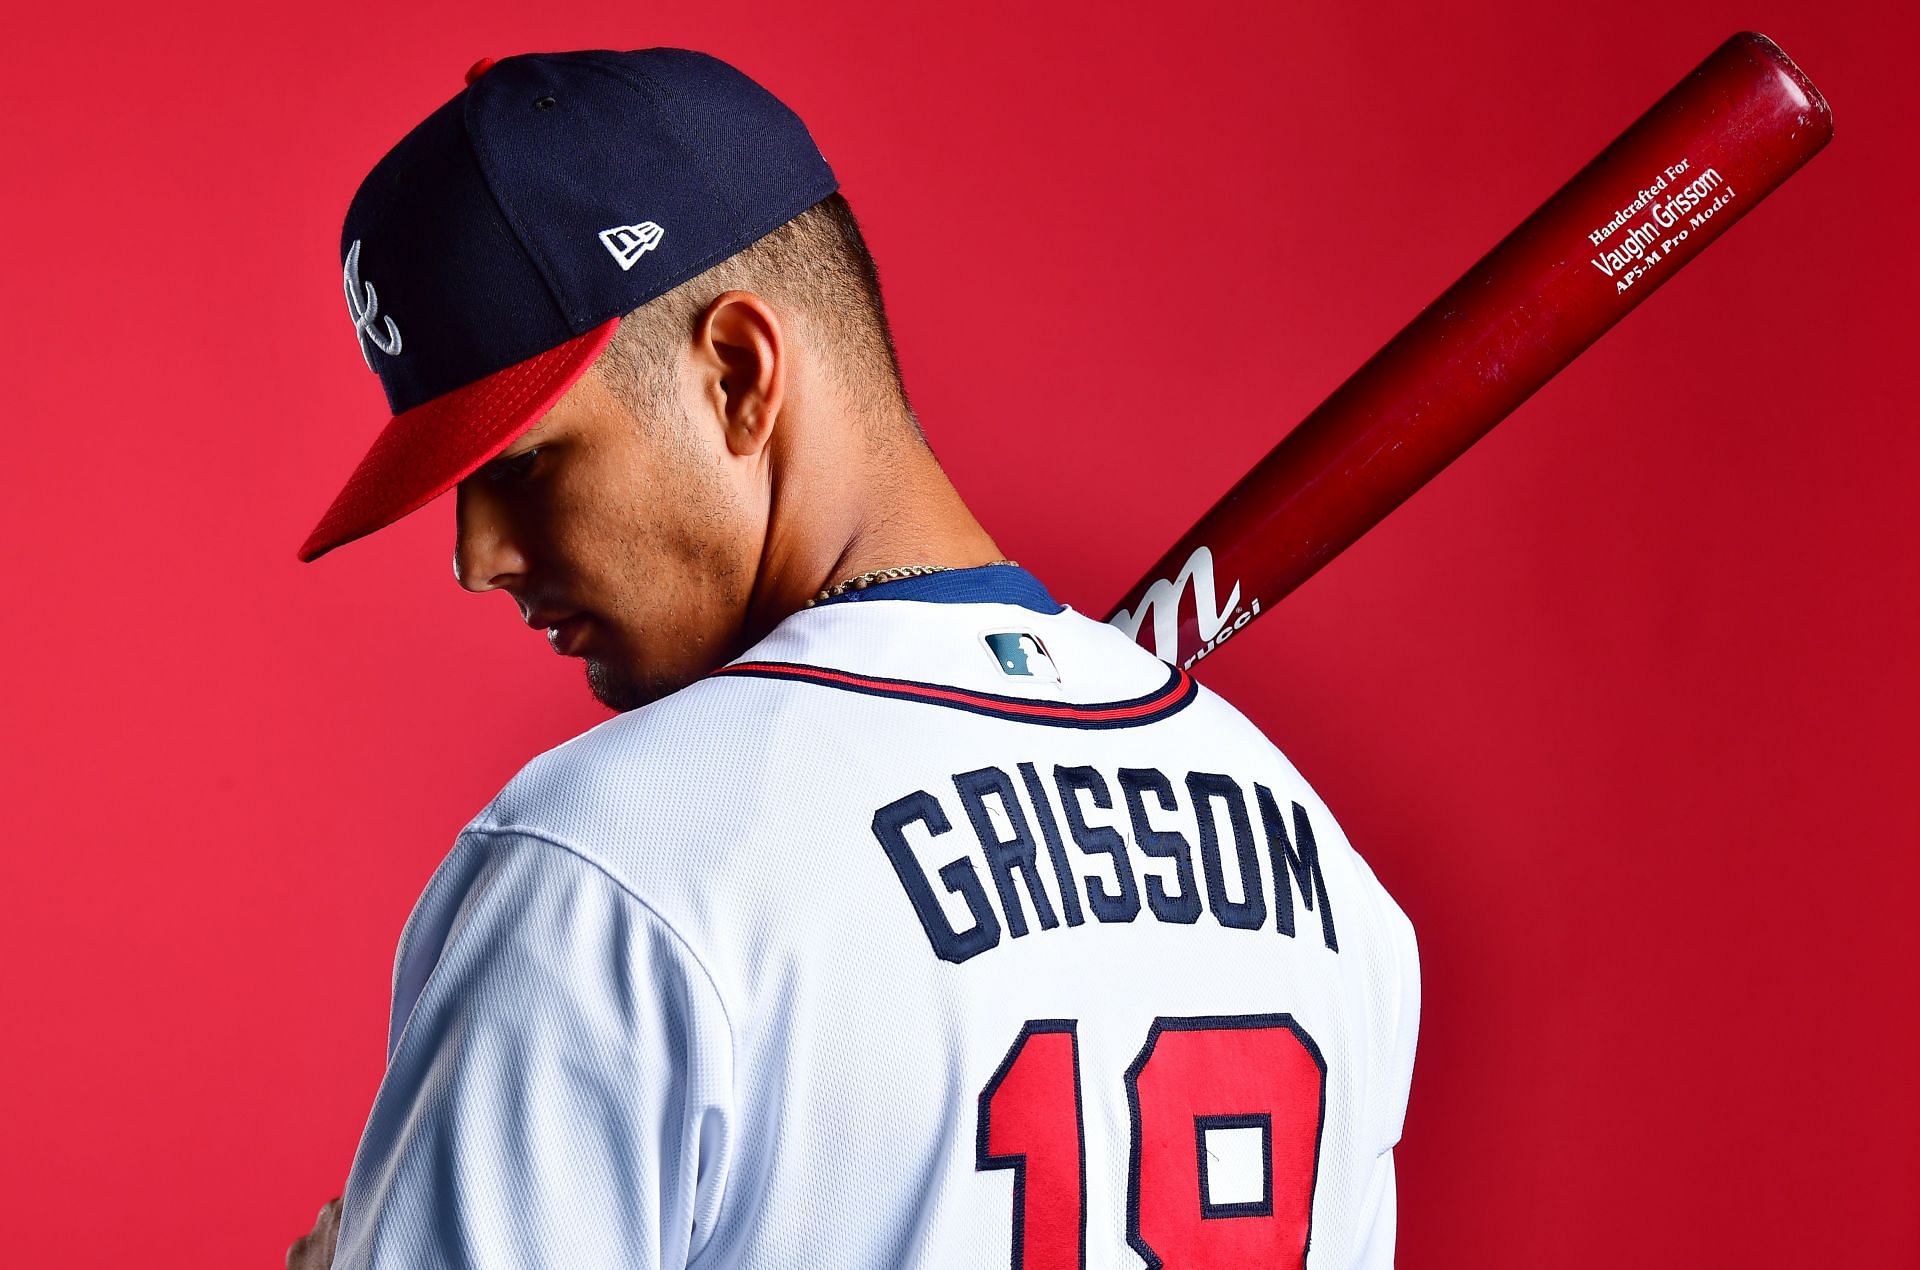 Vaughn Grissom was selected to represent the US U-18 baseball team in 2018. 